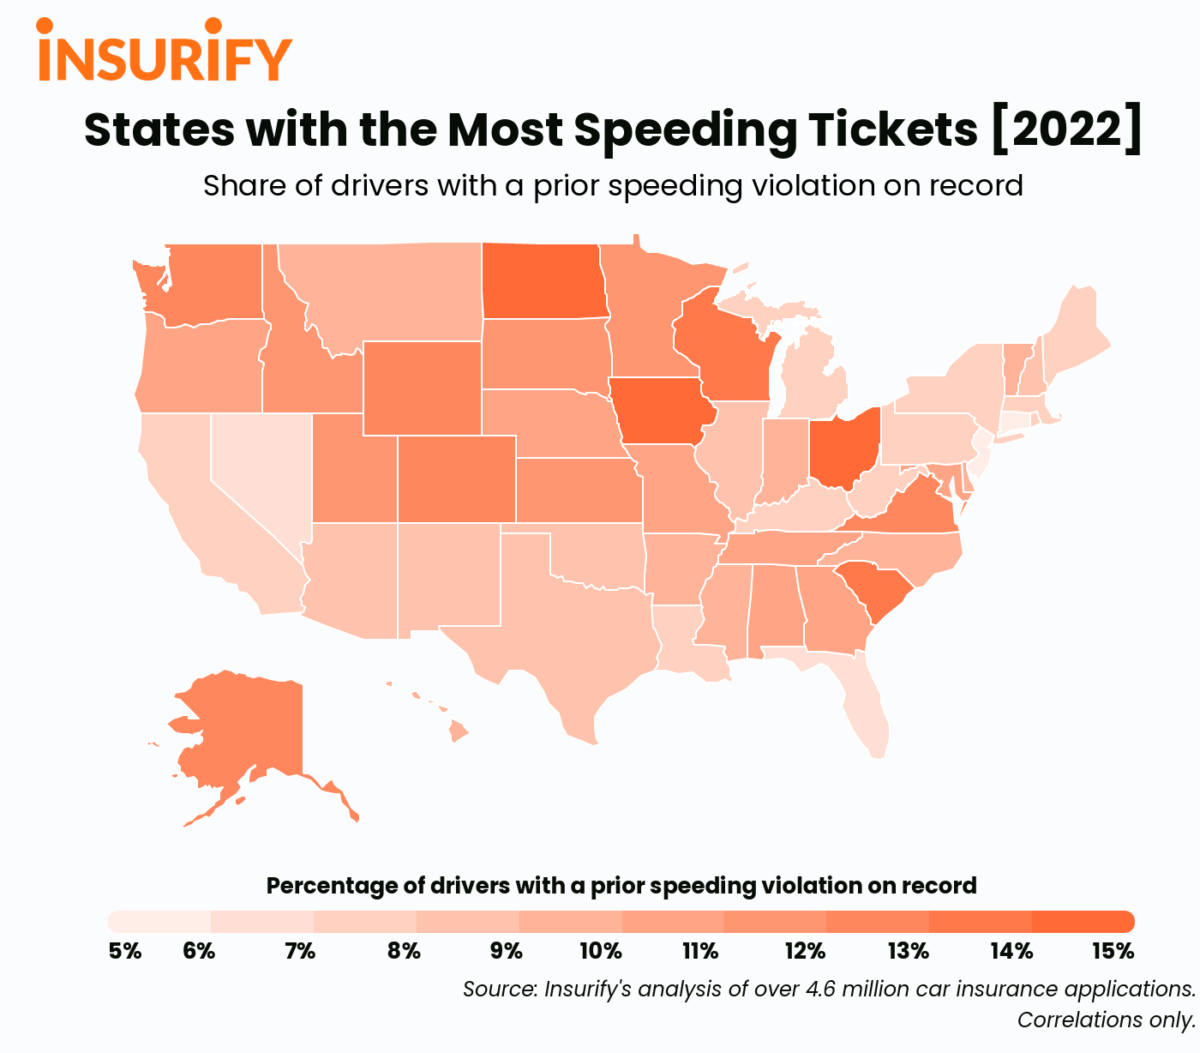 Heat map of the United States showing the states with the most speeding tickets in 2022.